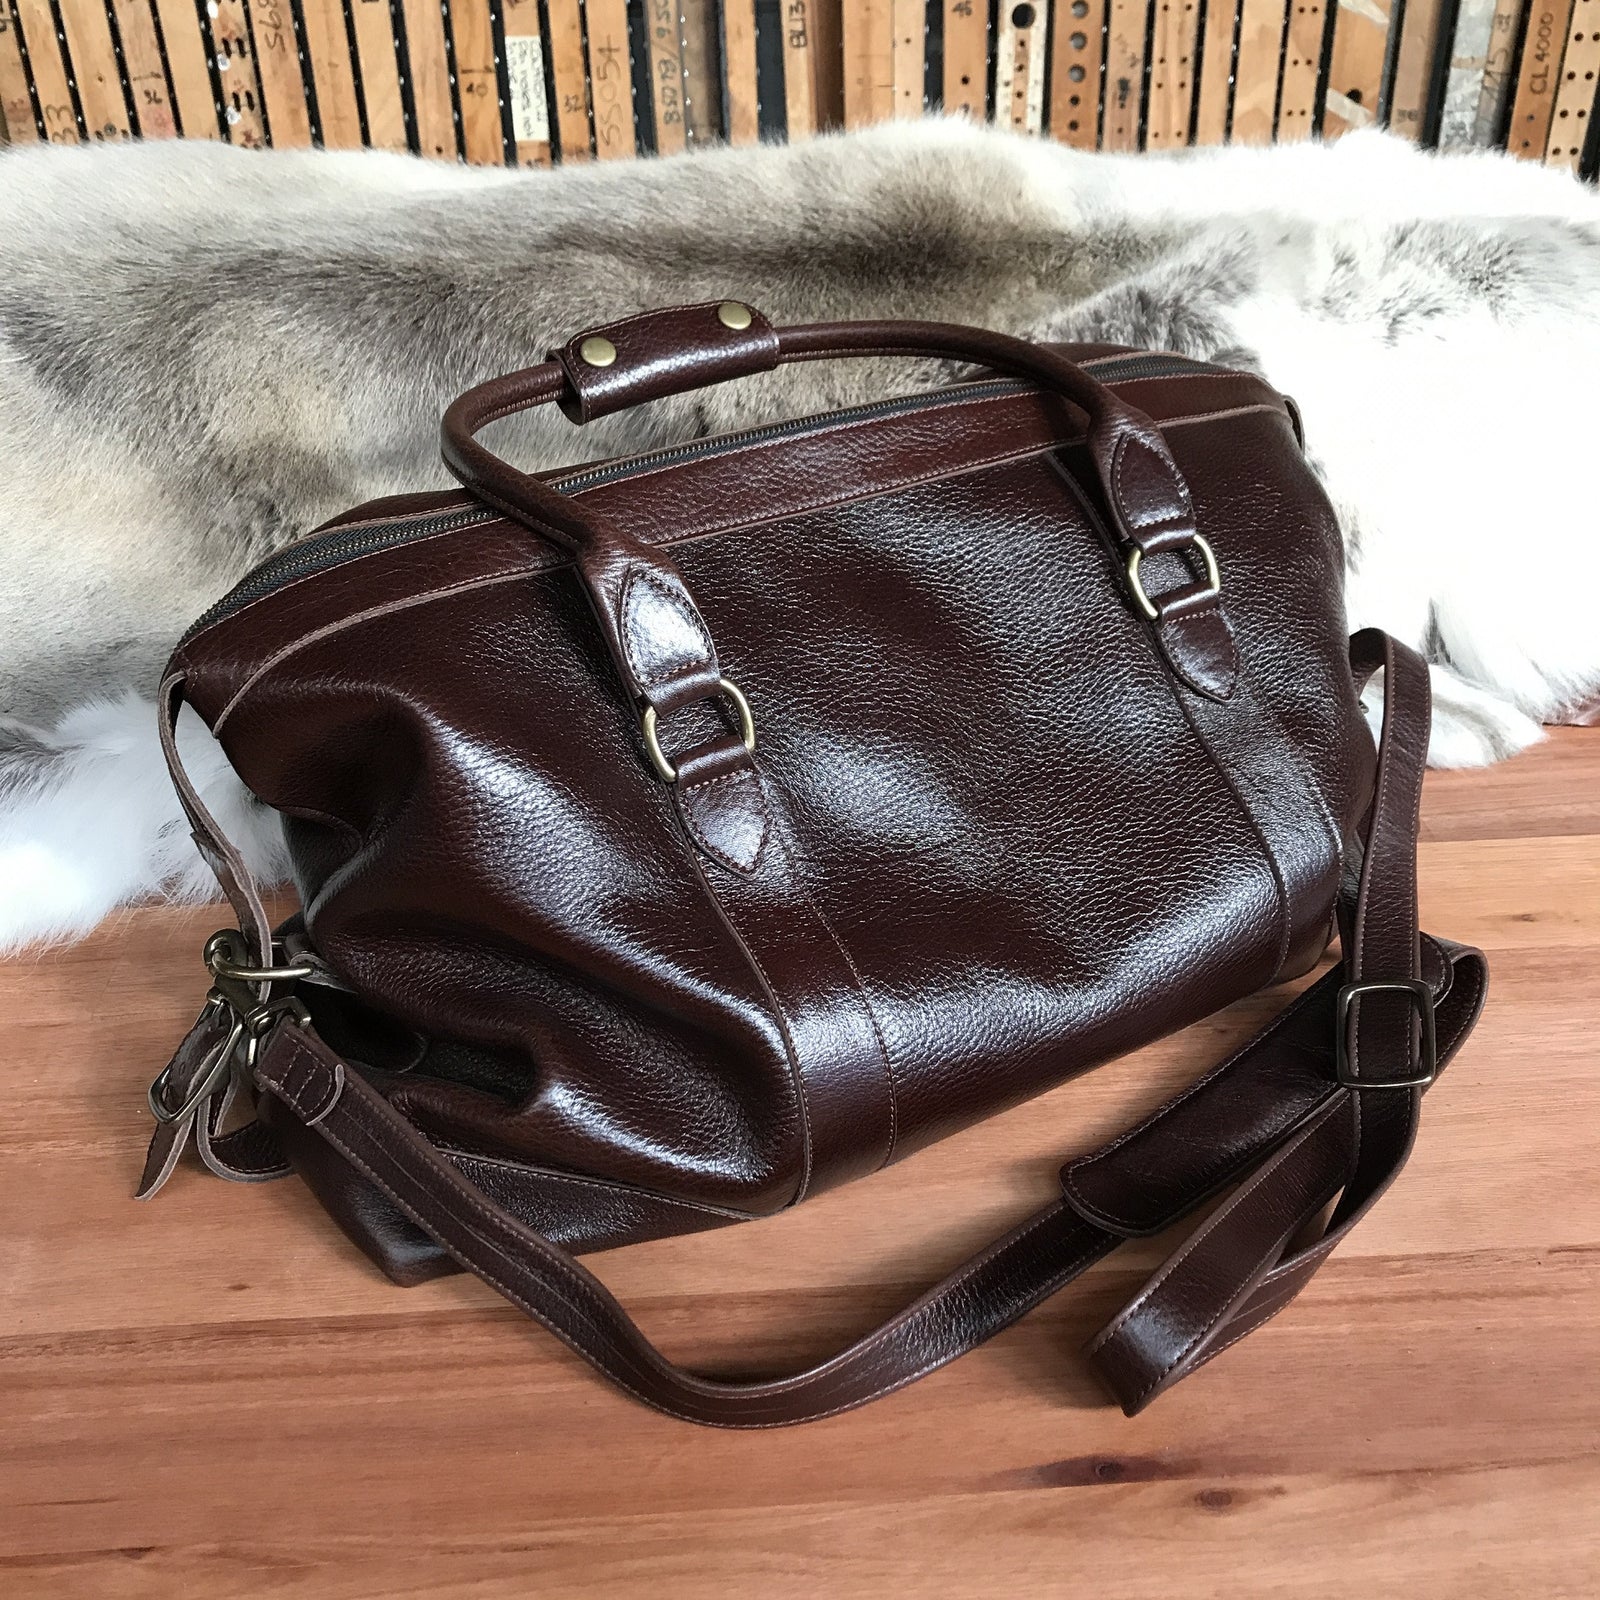 Leather Travel Bag, Leather Luggage Bags